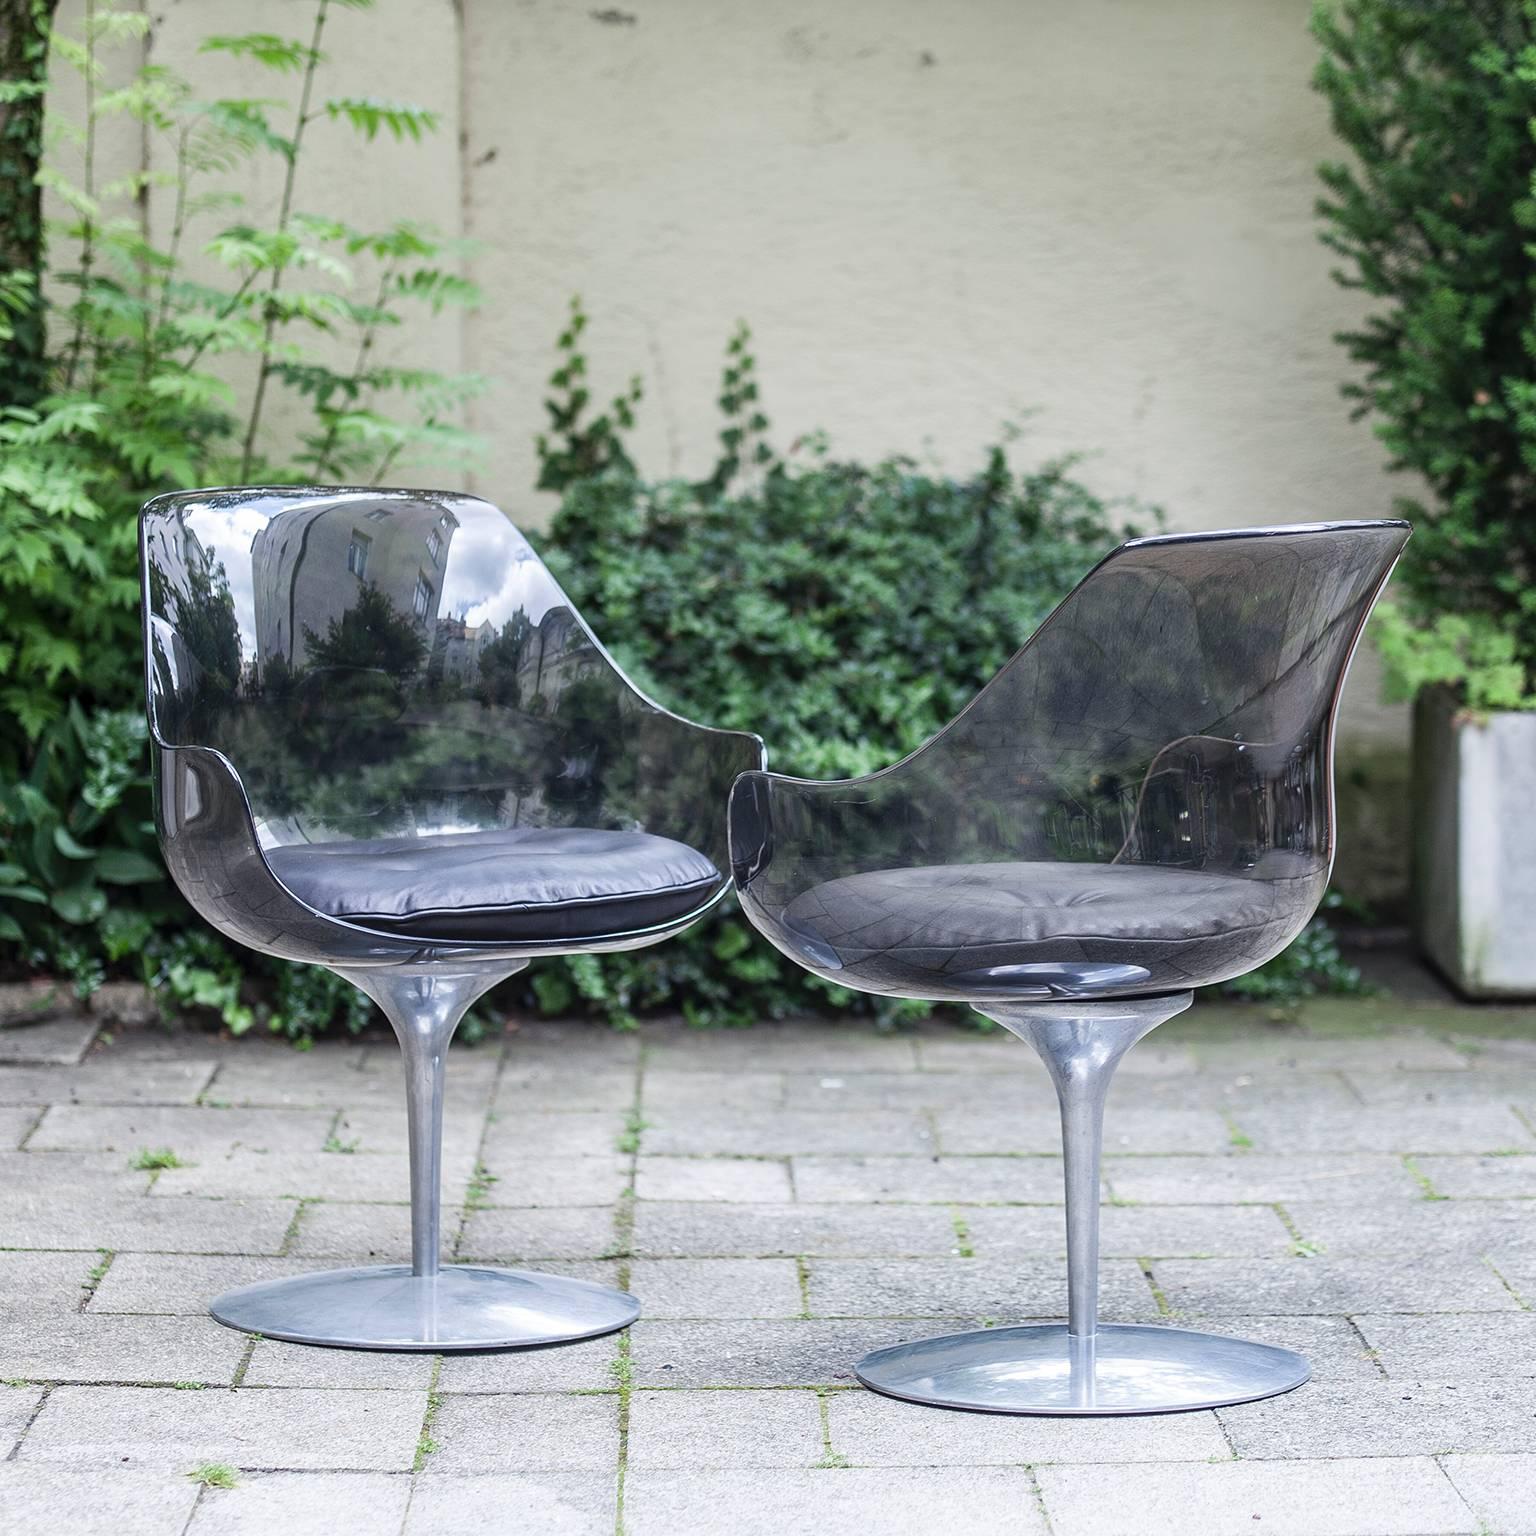 Set of two champagne chairs by Erwin & Estelle Laverne for Formes Nouvelles, on aluminum swivel pedestals with upholstered black leather seat pads and brown grey plexiglass, cast manufacturer's marks, USA, 1962.
                 